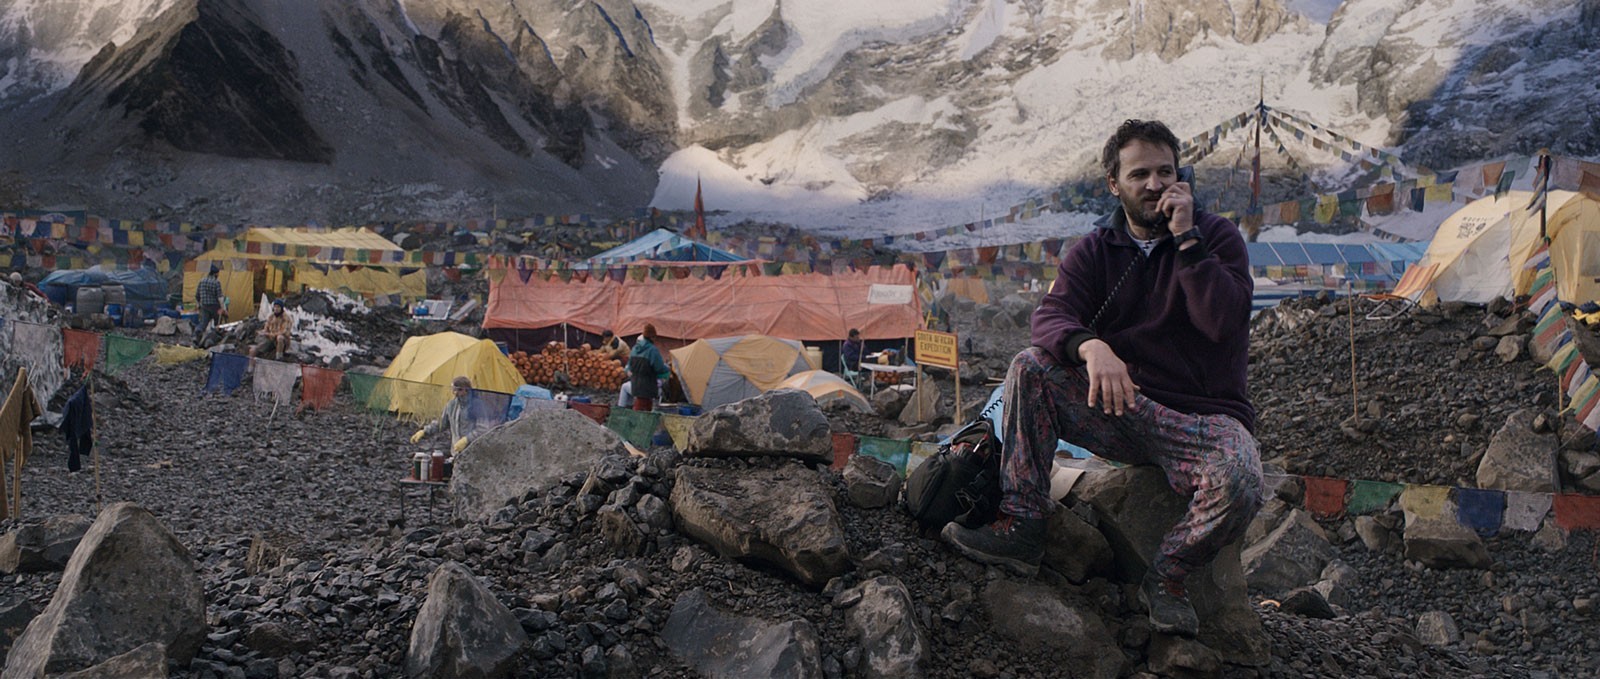 Jason Clarke stars as Rob Hall in Universal Pictures' Everest (2015)